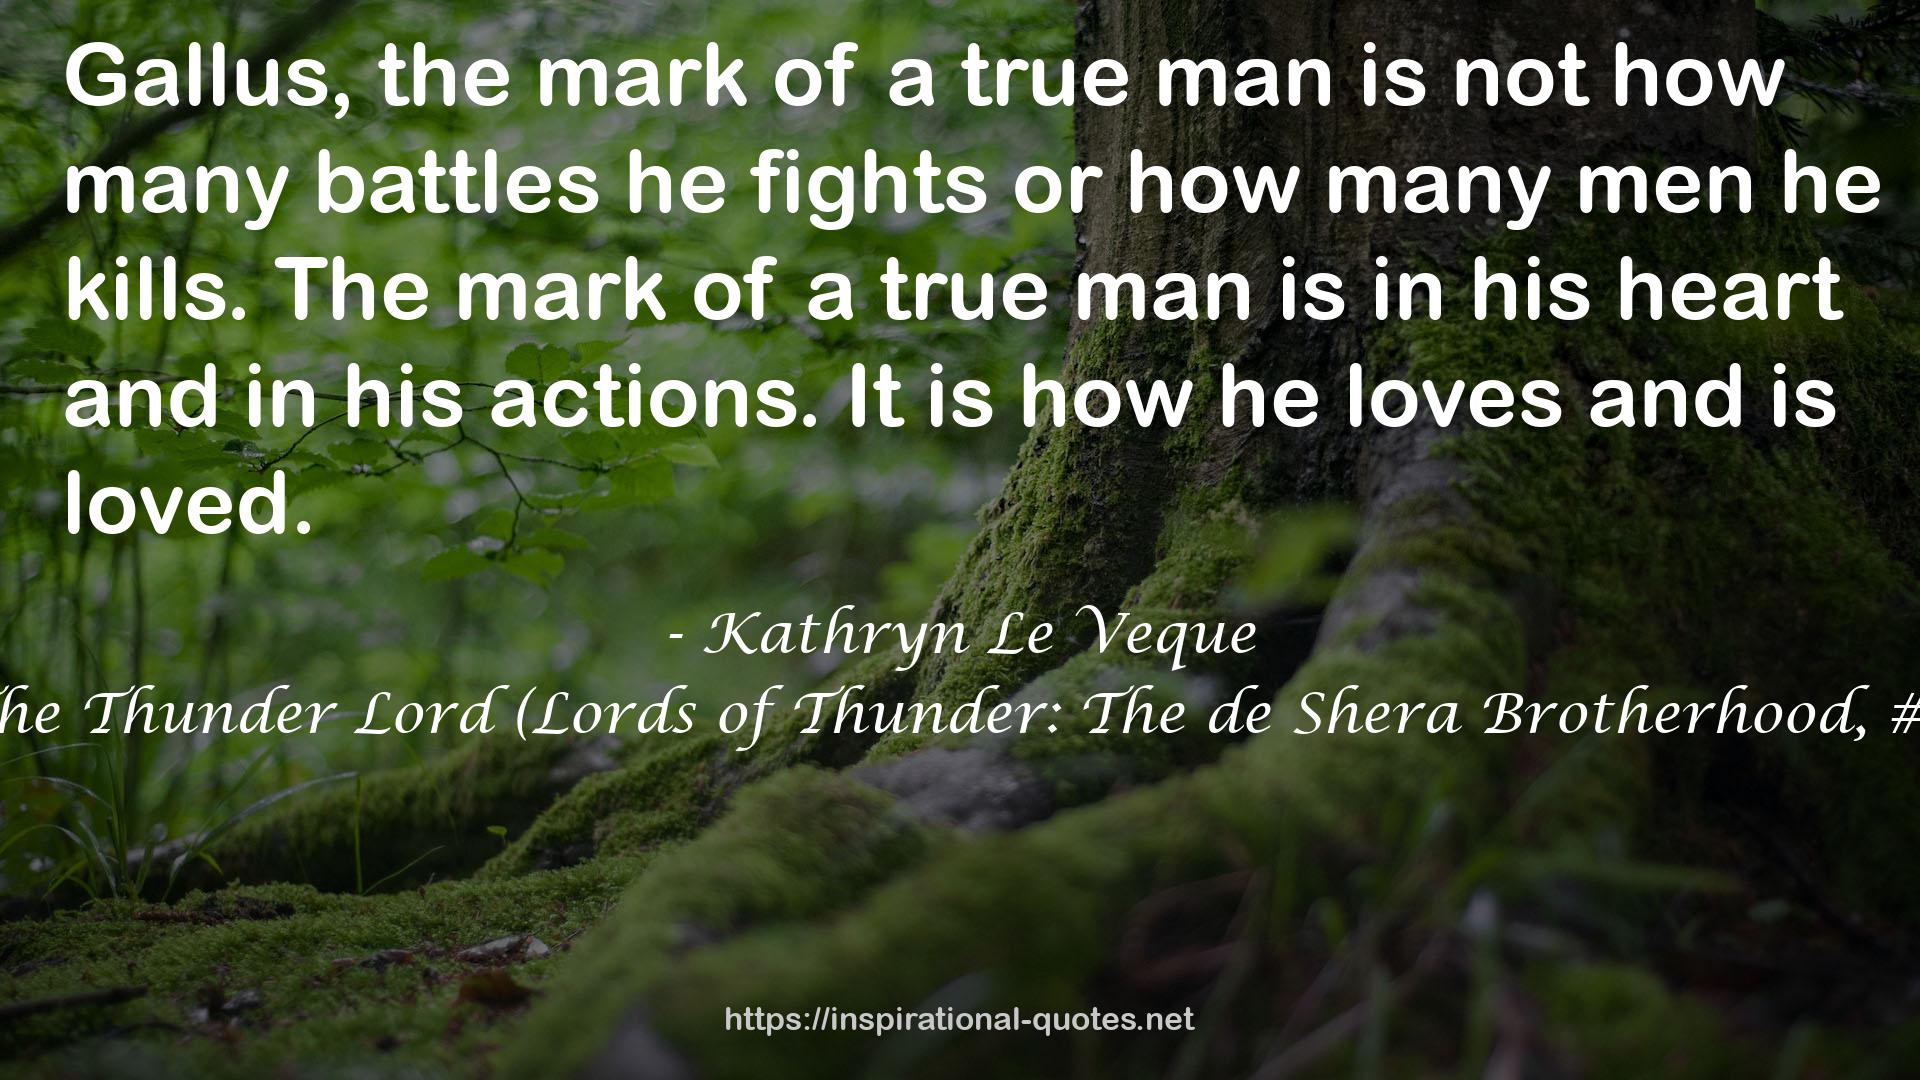 The Thunder Lord (Lords of Thunder: The de Shera Brotherhood, #1) QUOTES